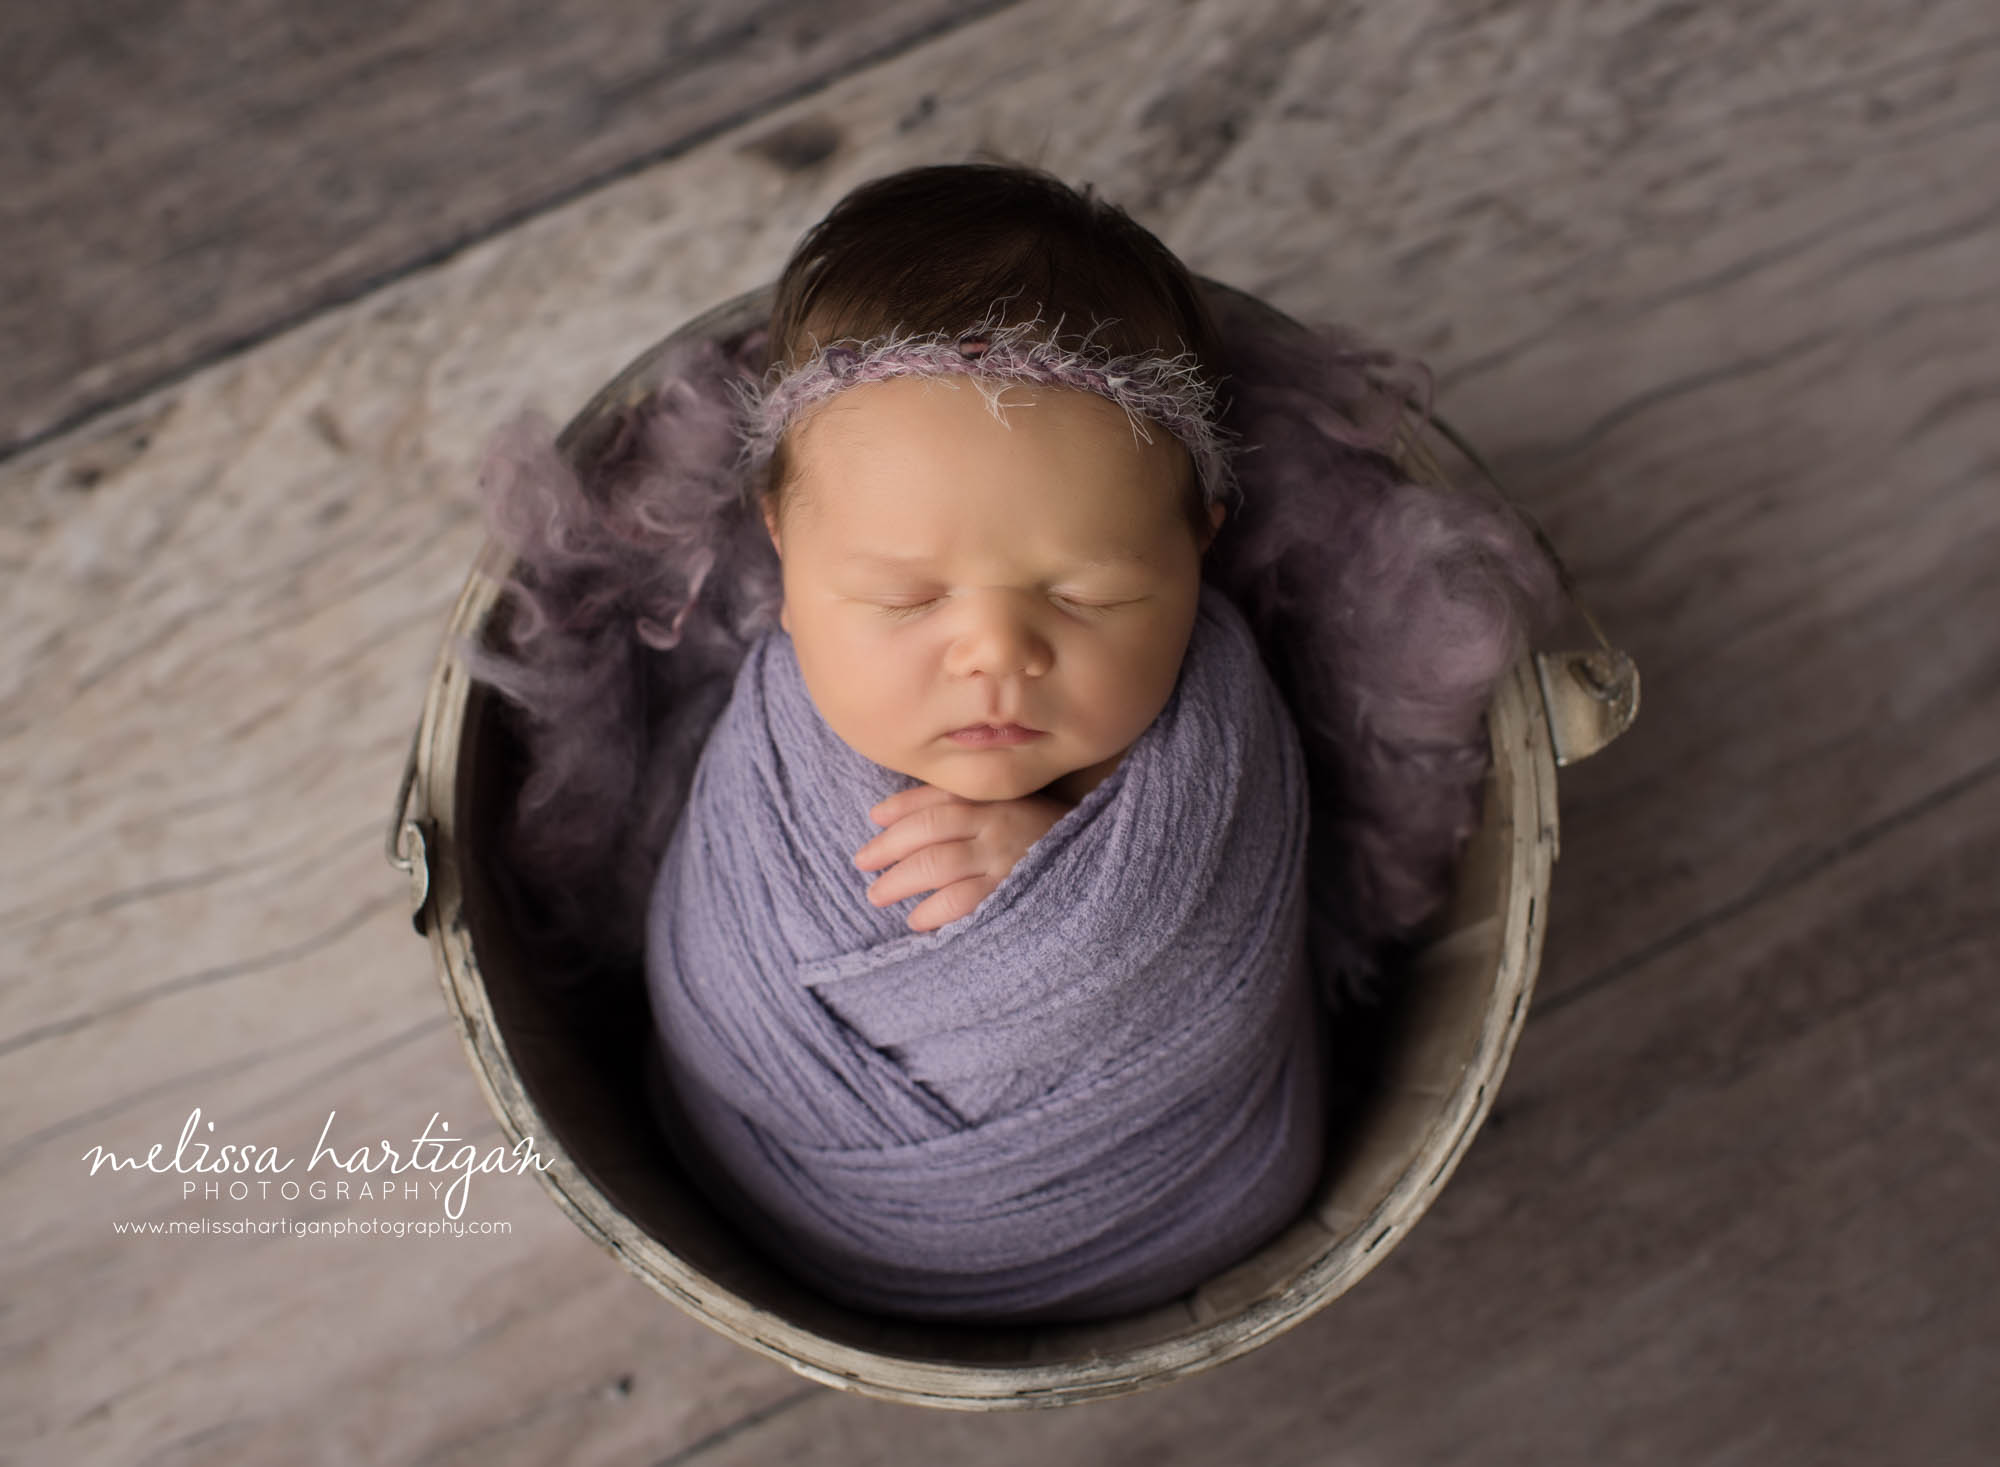 newborn baby girl wrapped in purple wrap posed in bucket CT baby photography